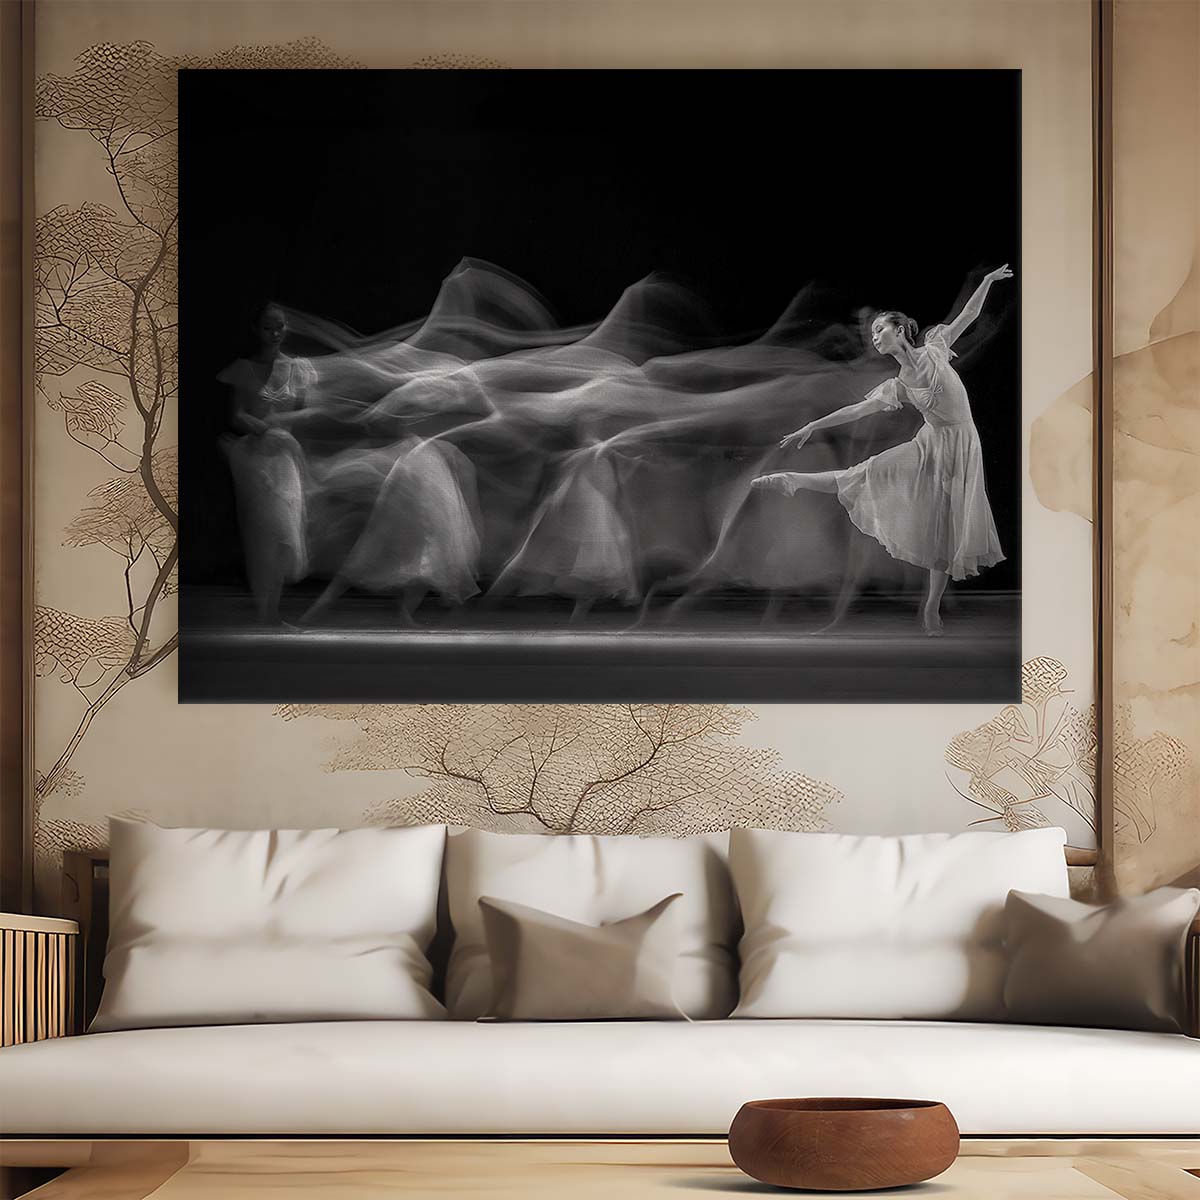 Graceful Ballerina in Motion Monochrome Dance Wall Art by Luxuriance Designs. Made in USA.